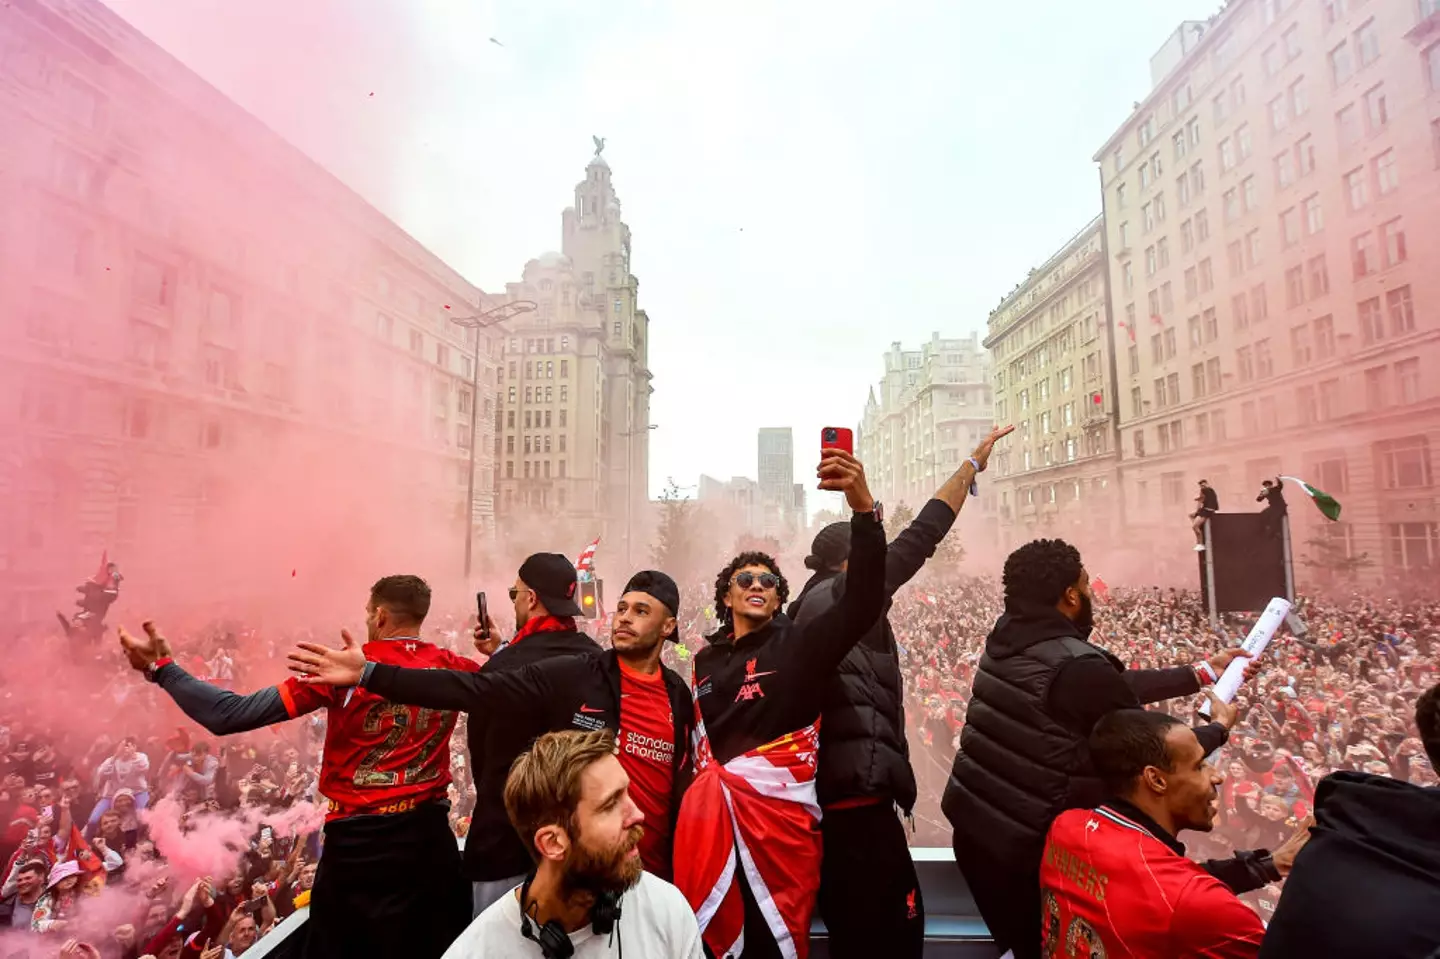 Scenes from the last Liverpool parade